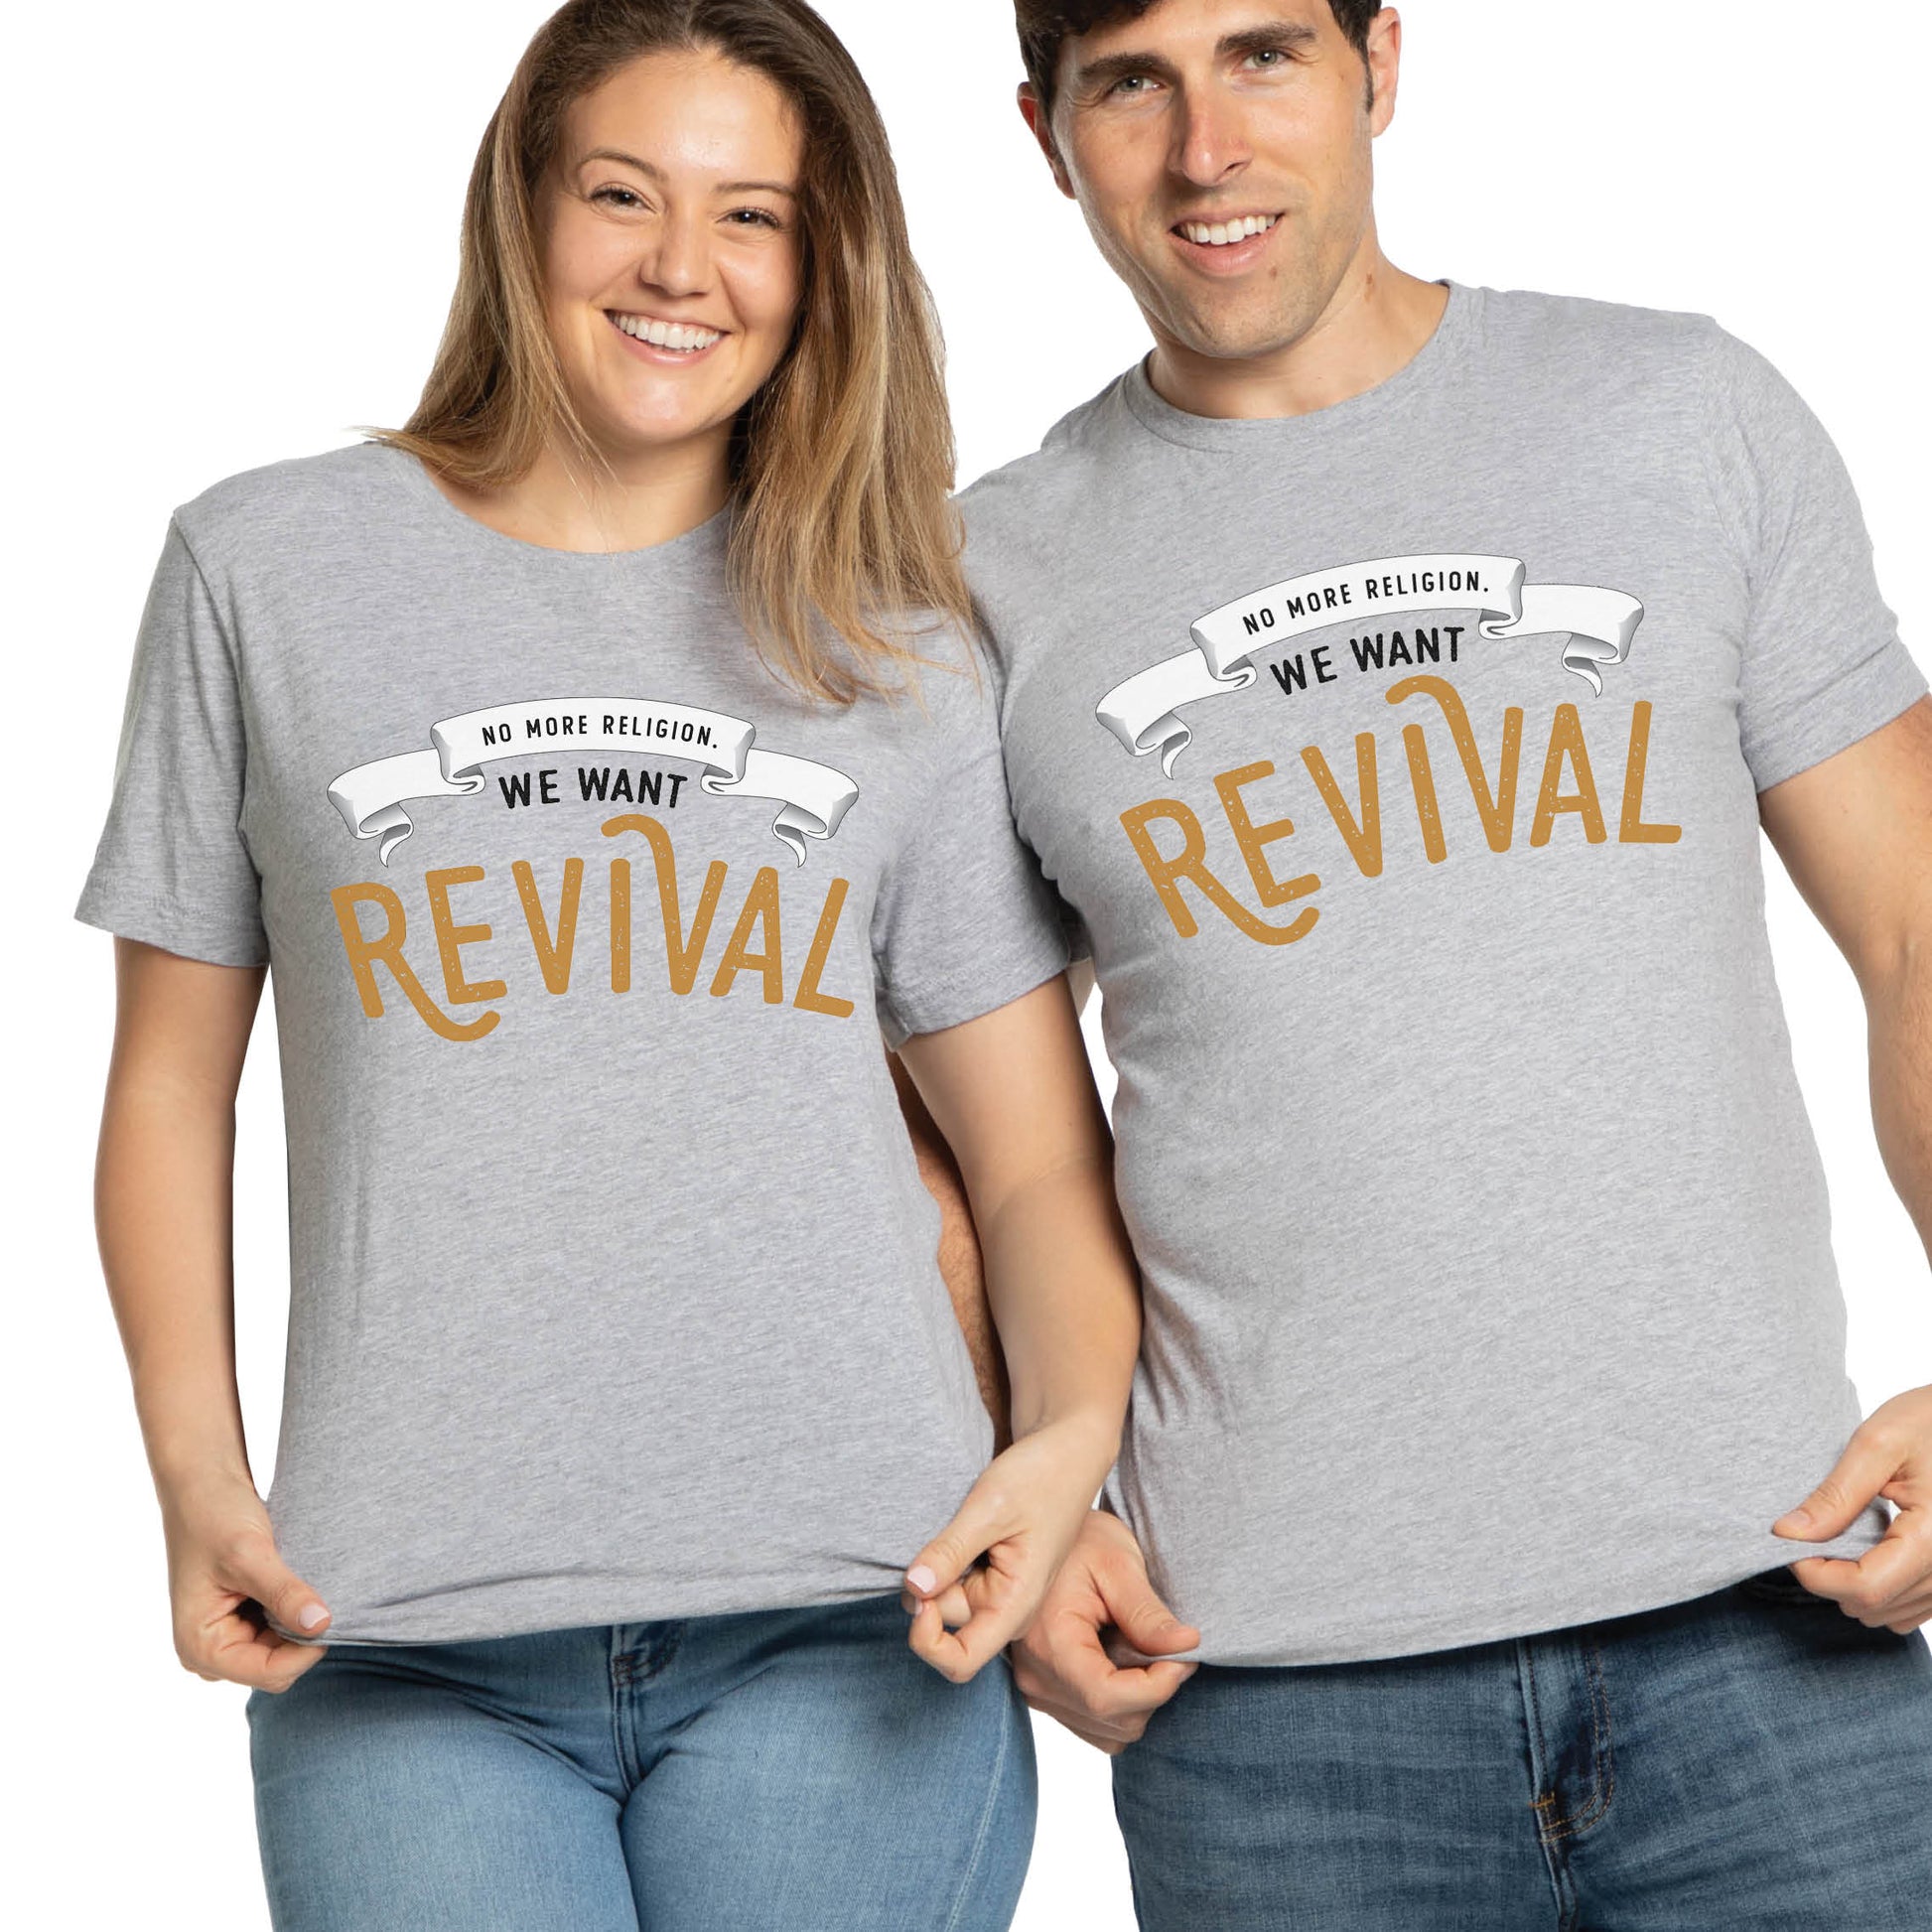 Athletic Heather Gray Christian aesthetic soft Unisex T-shirt that says, No More Religion We Want Revival printed in gold and black, church gift Jesus couple graphic tees designed for men and women 